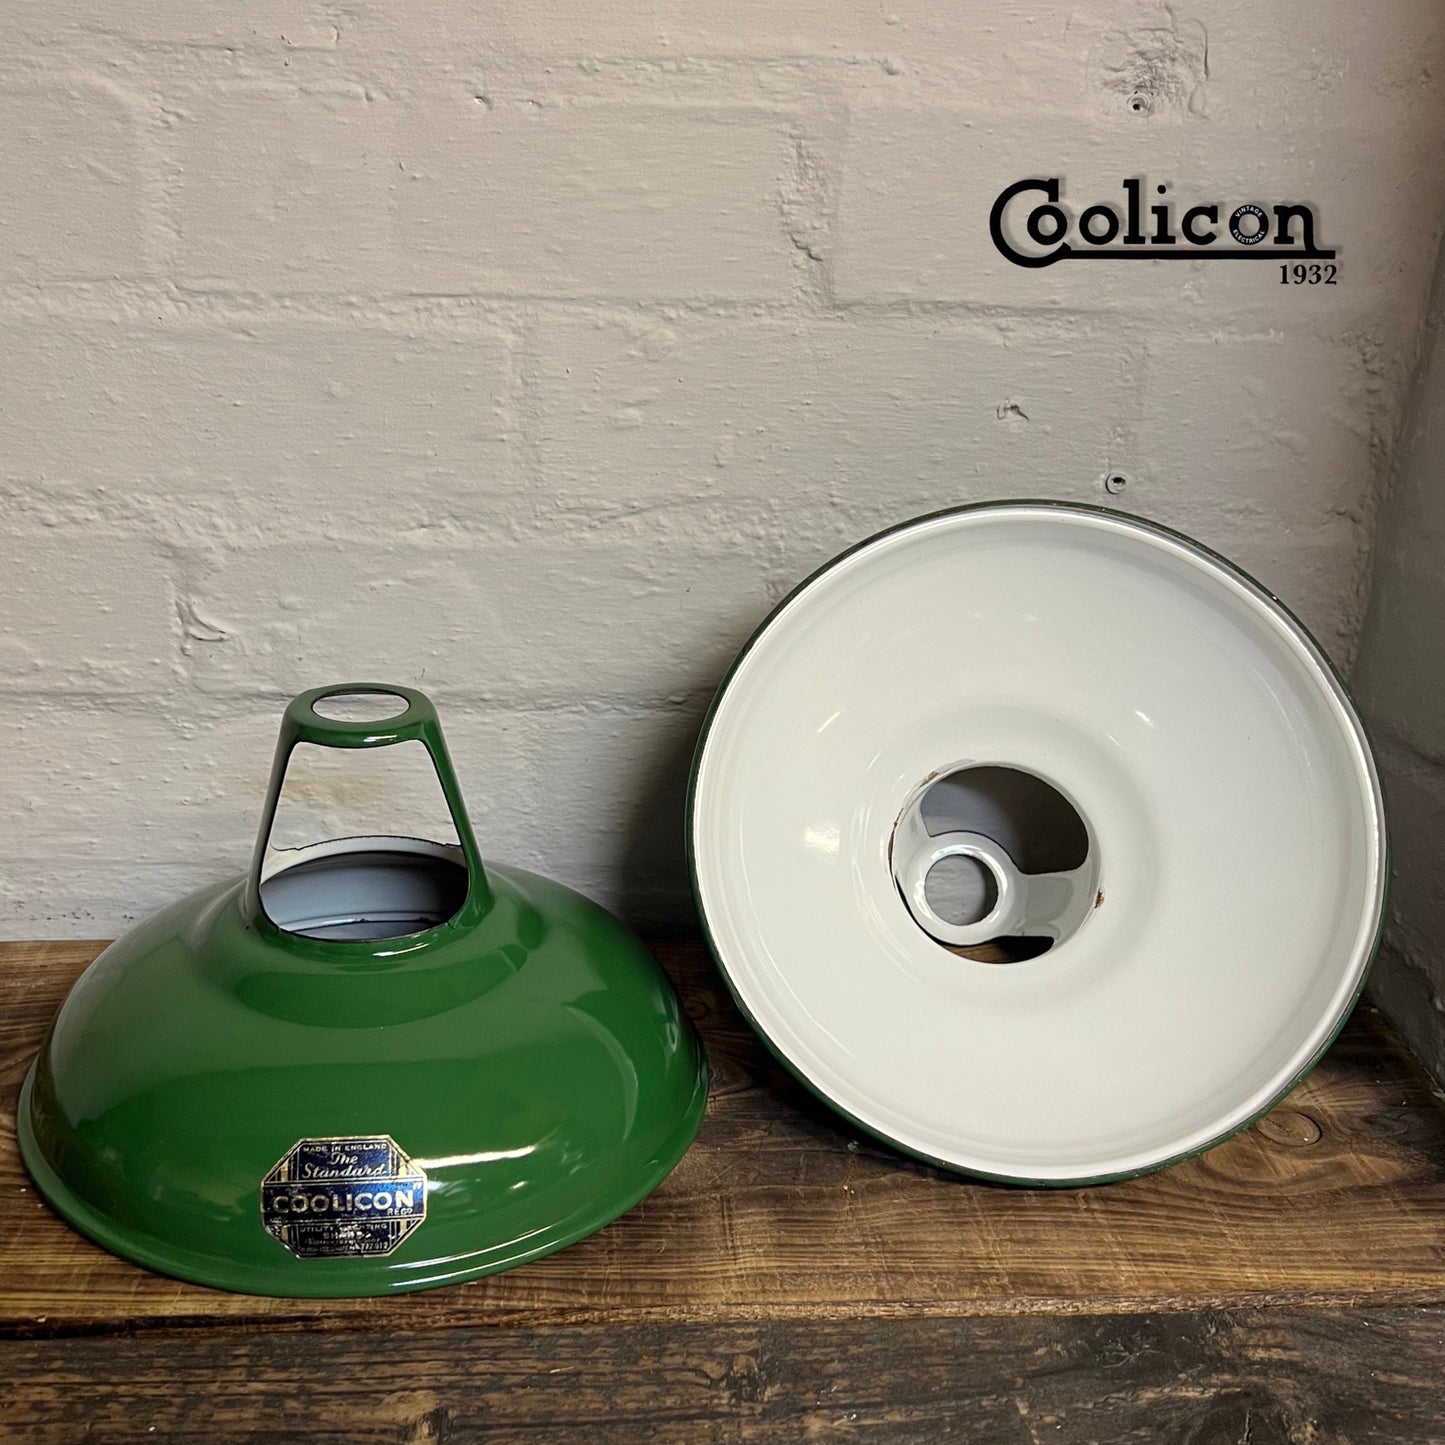 Geniune Green Solid Coolicon 1932 Shade Pendant Wire Set Light | 9 Inch | Ceiling Dining Room | Antique Restored | Kitchen Table | Vintage